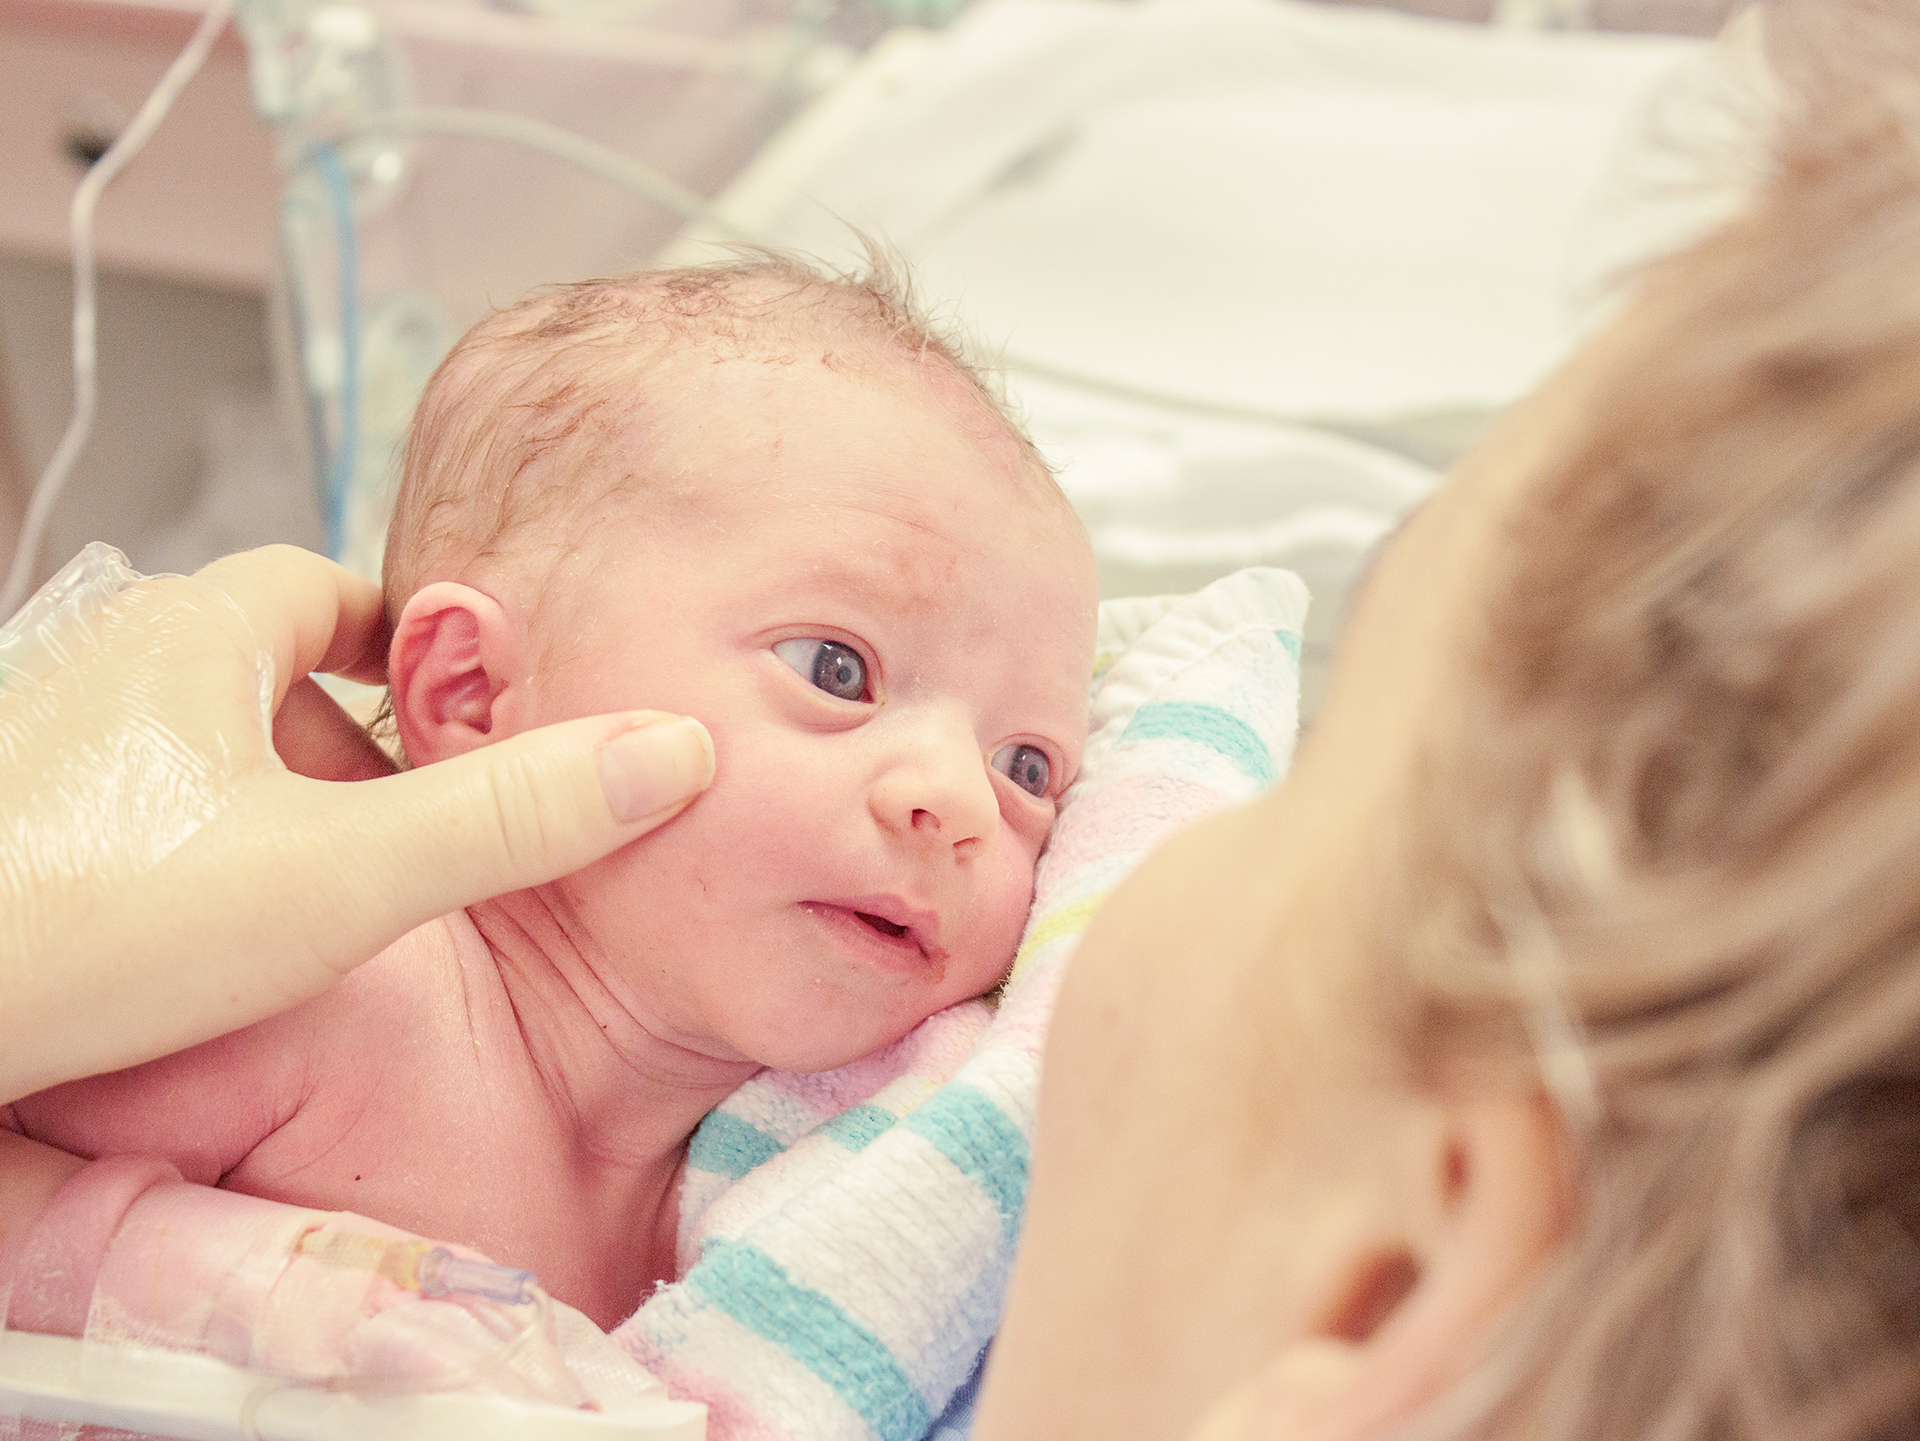 Kangaroo care found to be beneficial for full-term babies